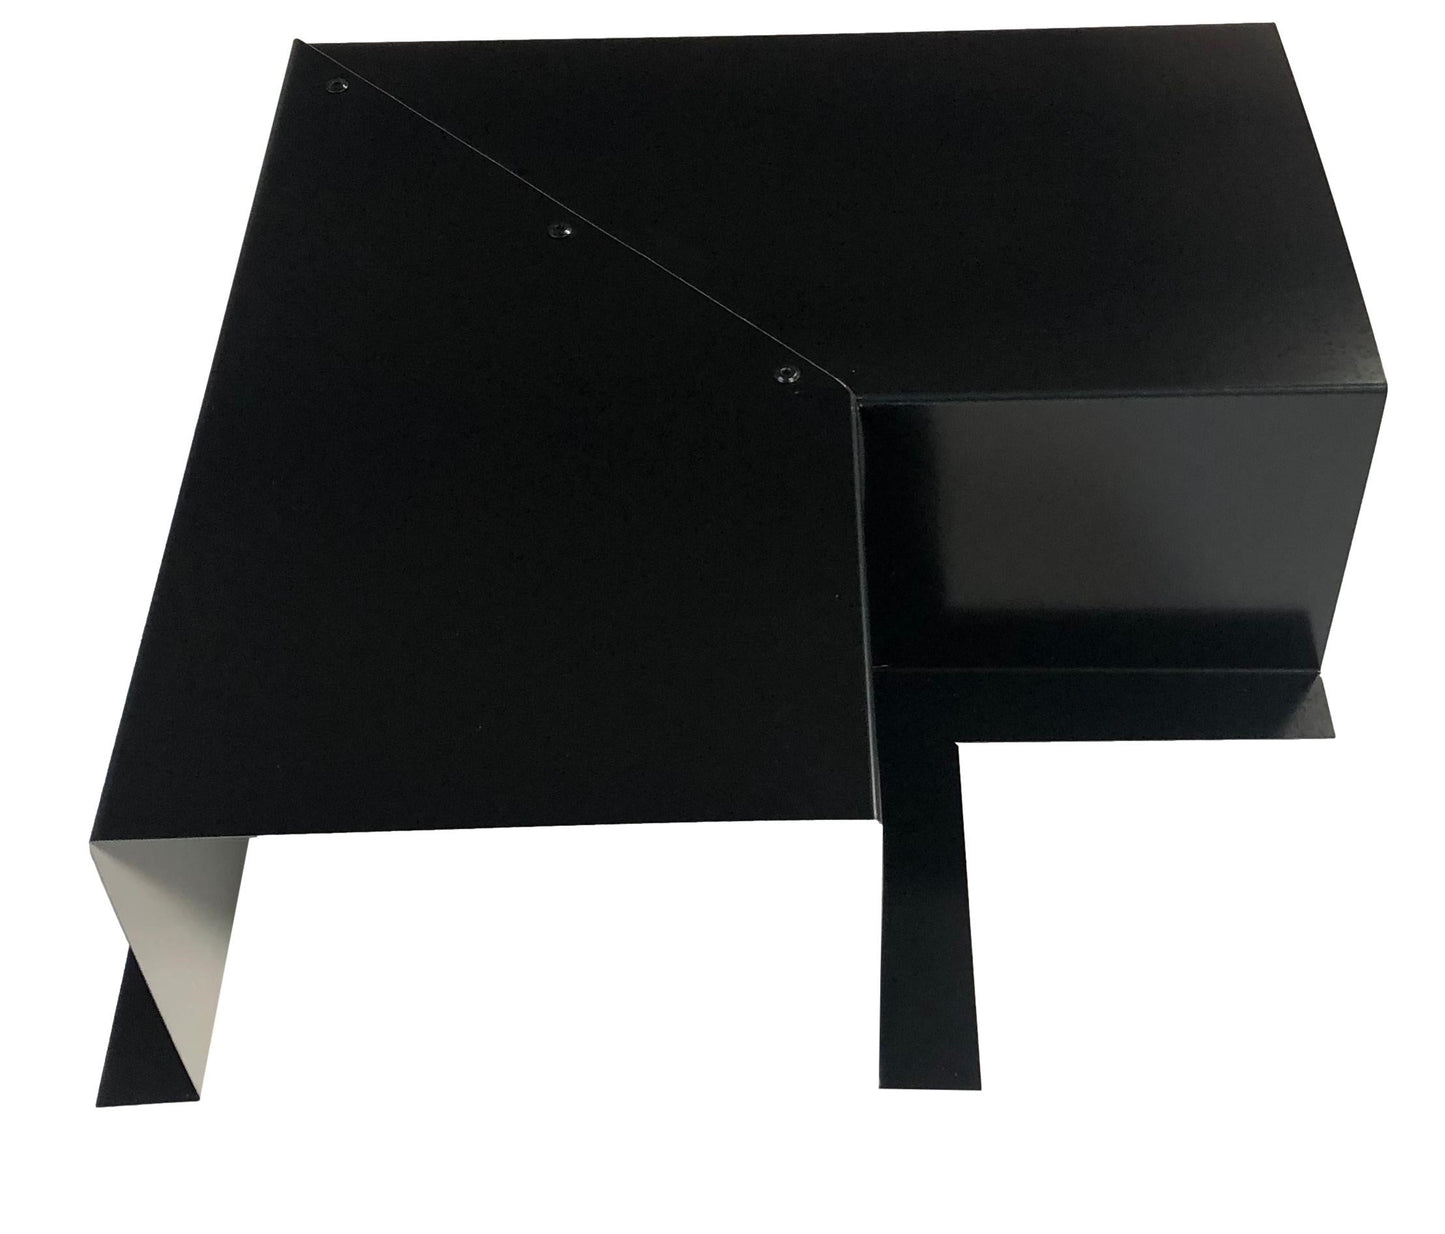 A black, angular metal object with sharp edges and a geometric design. It features a flat top surface and an L-shaped bottom section. The overall appearance is modern and industrial, with smooth surfaces and a minimalist aesthetic, ensuring easy installation for Perma Cover Residential Series - Line Set Cover Side Turning Elbows - Premium Quality in HVAC line sets.